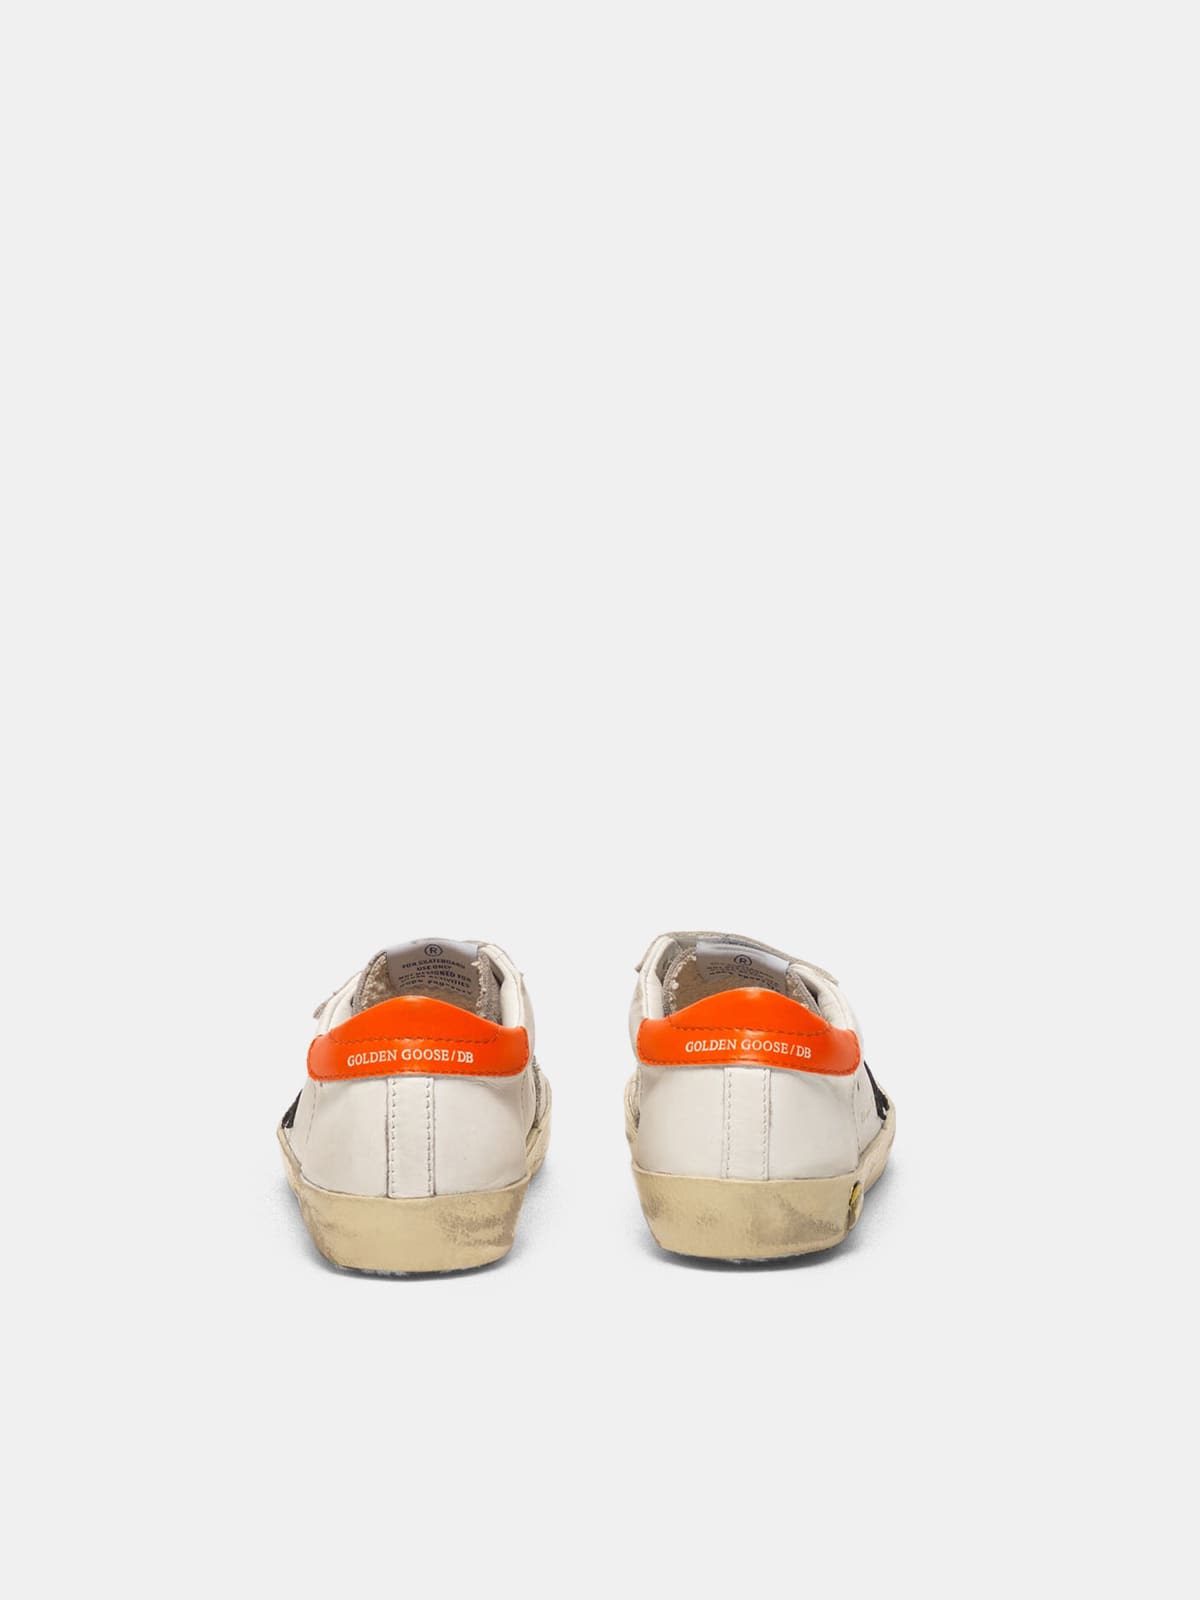 Old School sneakers made of leather with orange heel tab